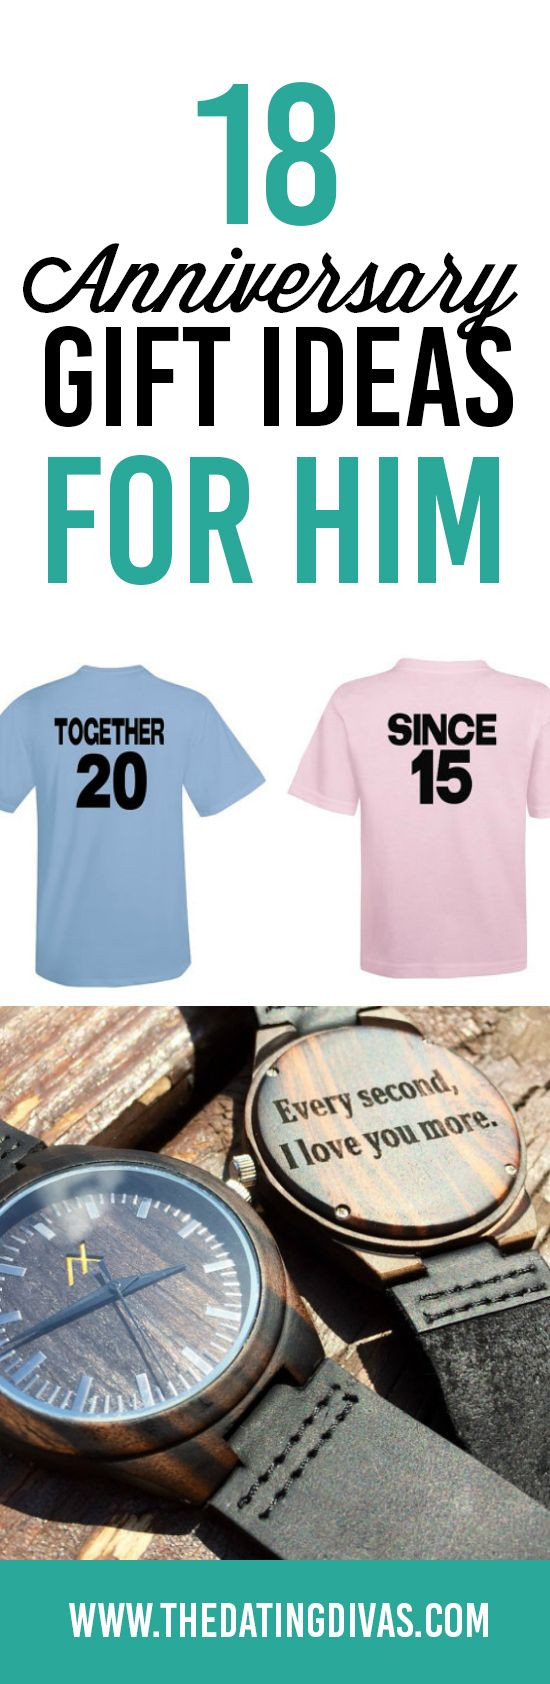 Creative Anniversary Gift Ideas For Him
 689 best Anniversary Ideas images on Pinterest